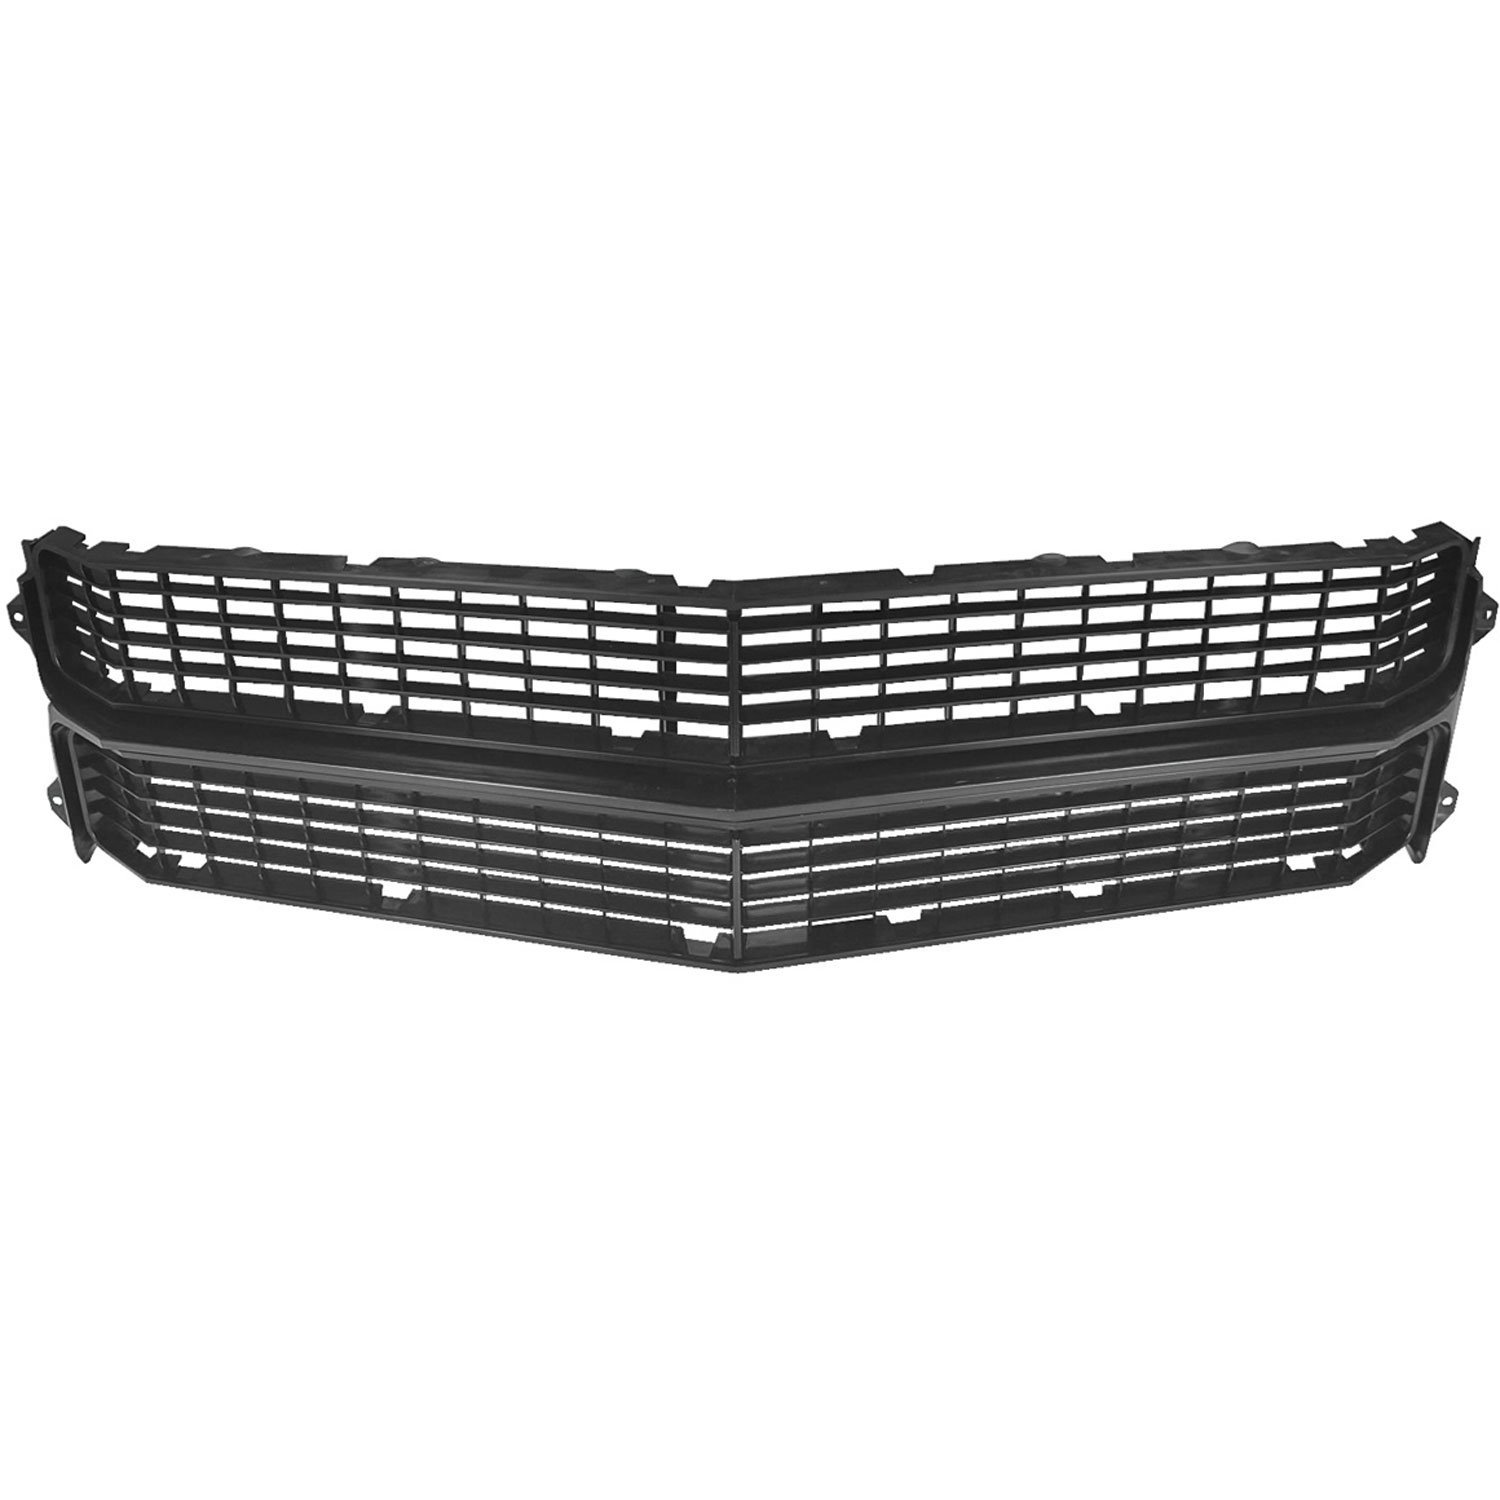 Grille for 1970 Chevrolet Chevelle SS, El Camino SS